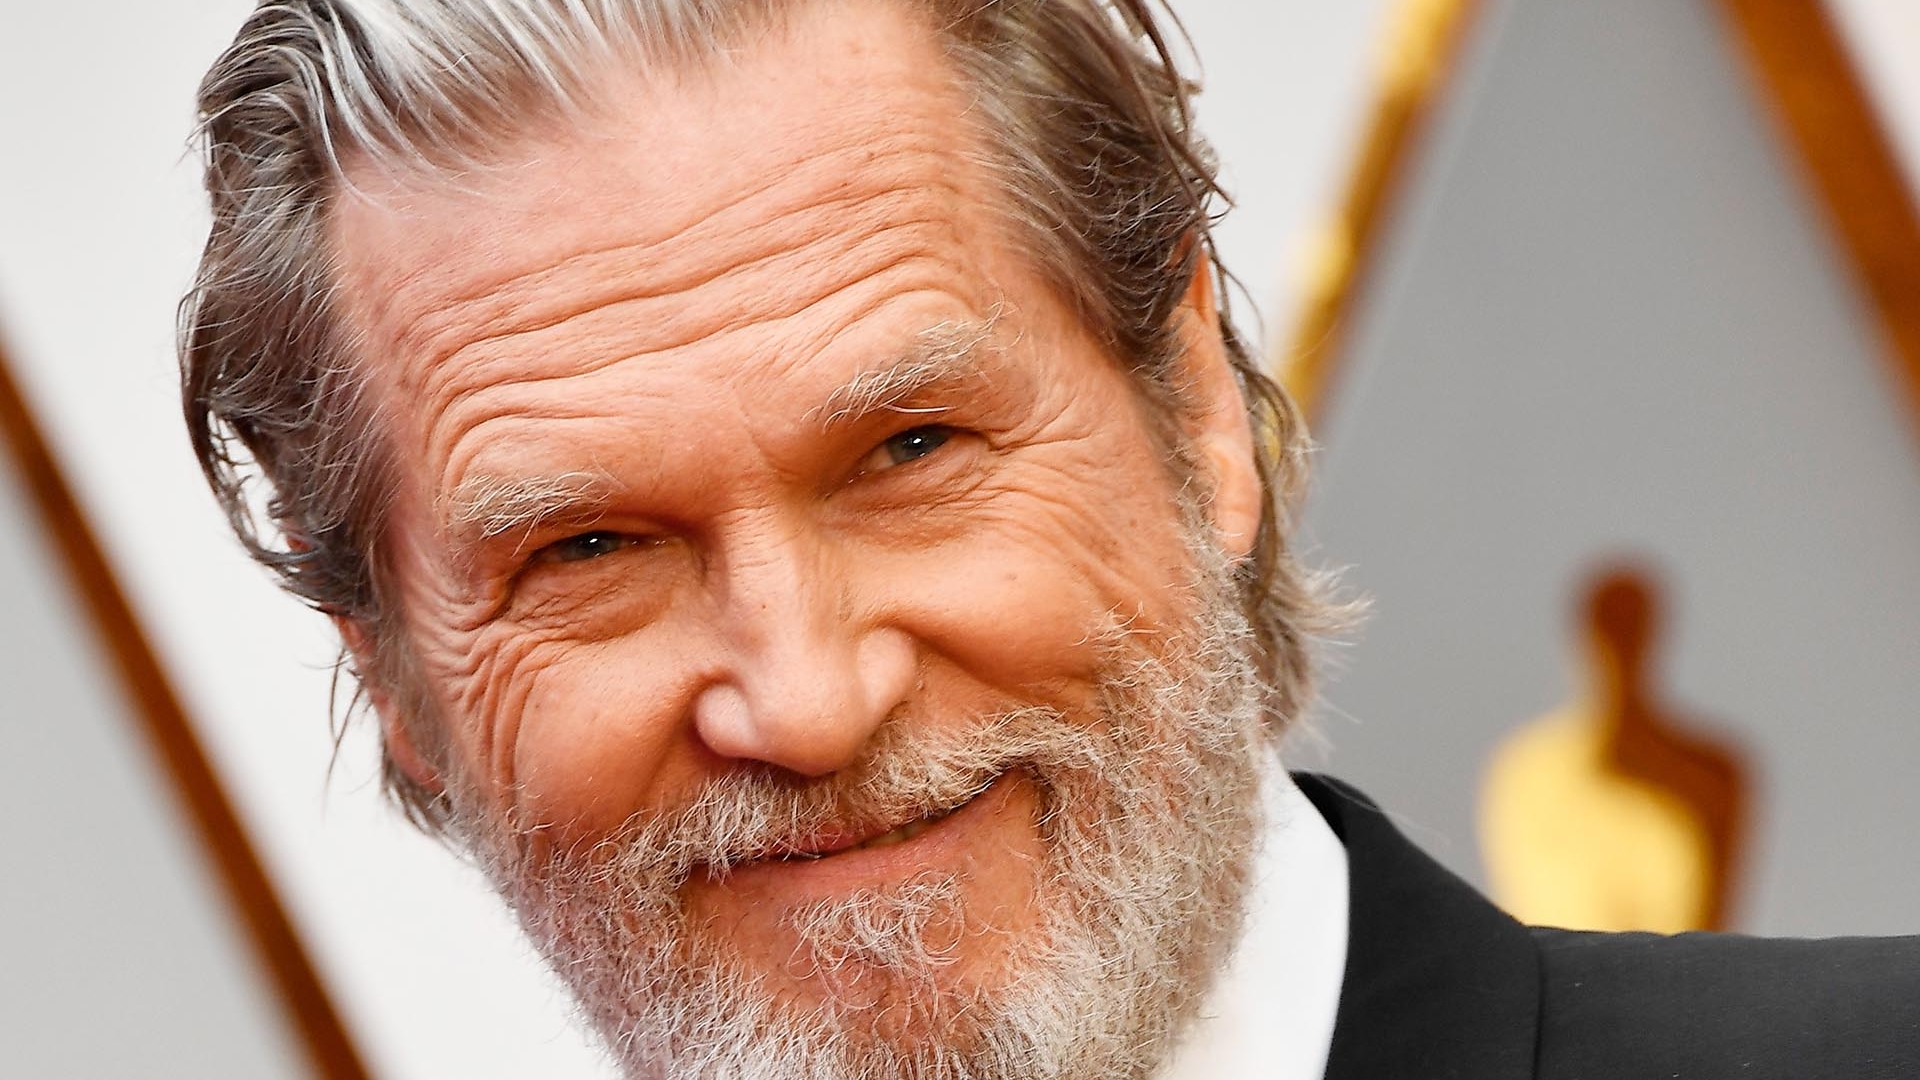 HOLLYWOOD, CA - FEBRUARY 26:  Actor Jeff Bridges attends the 89th Annual Academy Awards at Hollywood &amp; Highland Center on February 26, 2017 in Hollywood, California.  (Photo by Frazer Harrison/Getty Images)